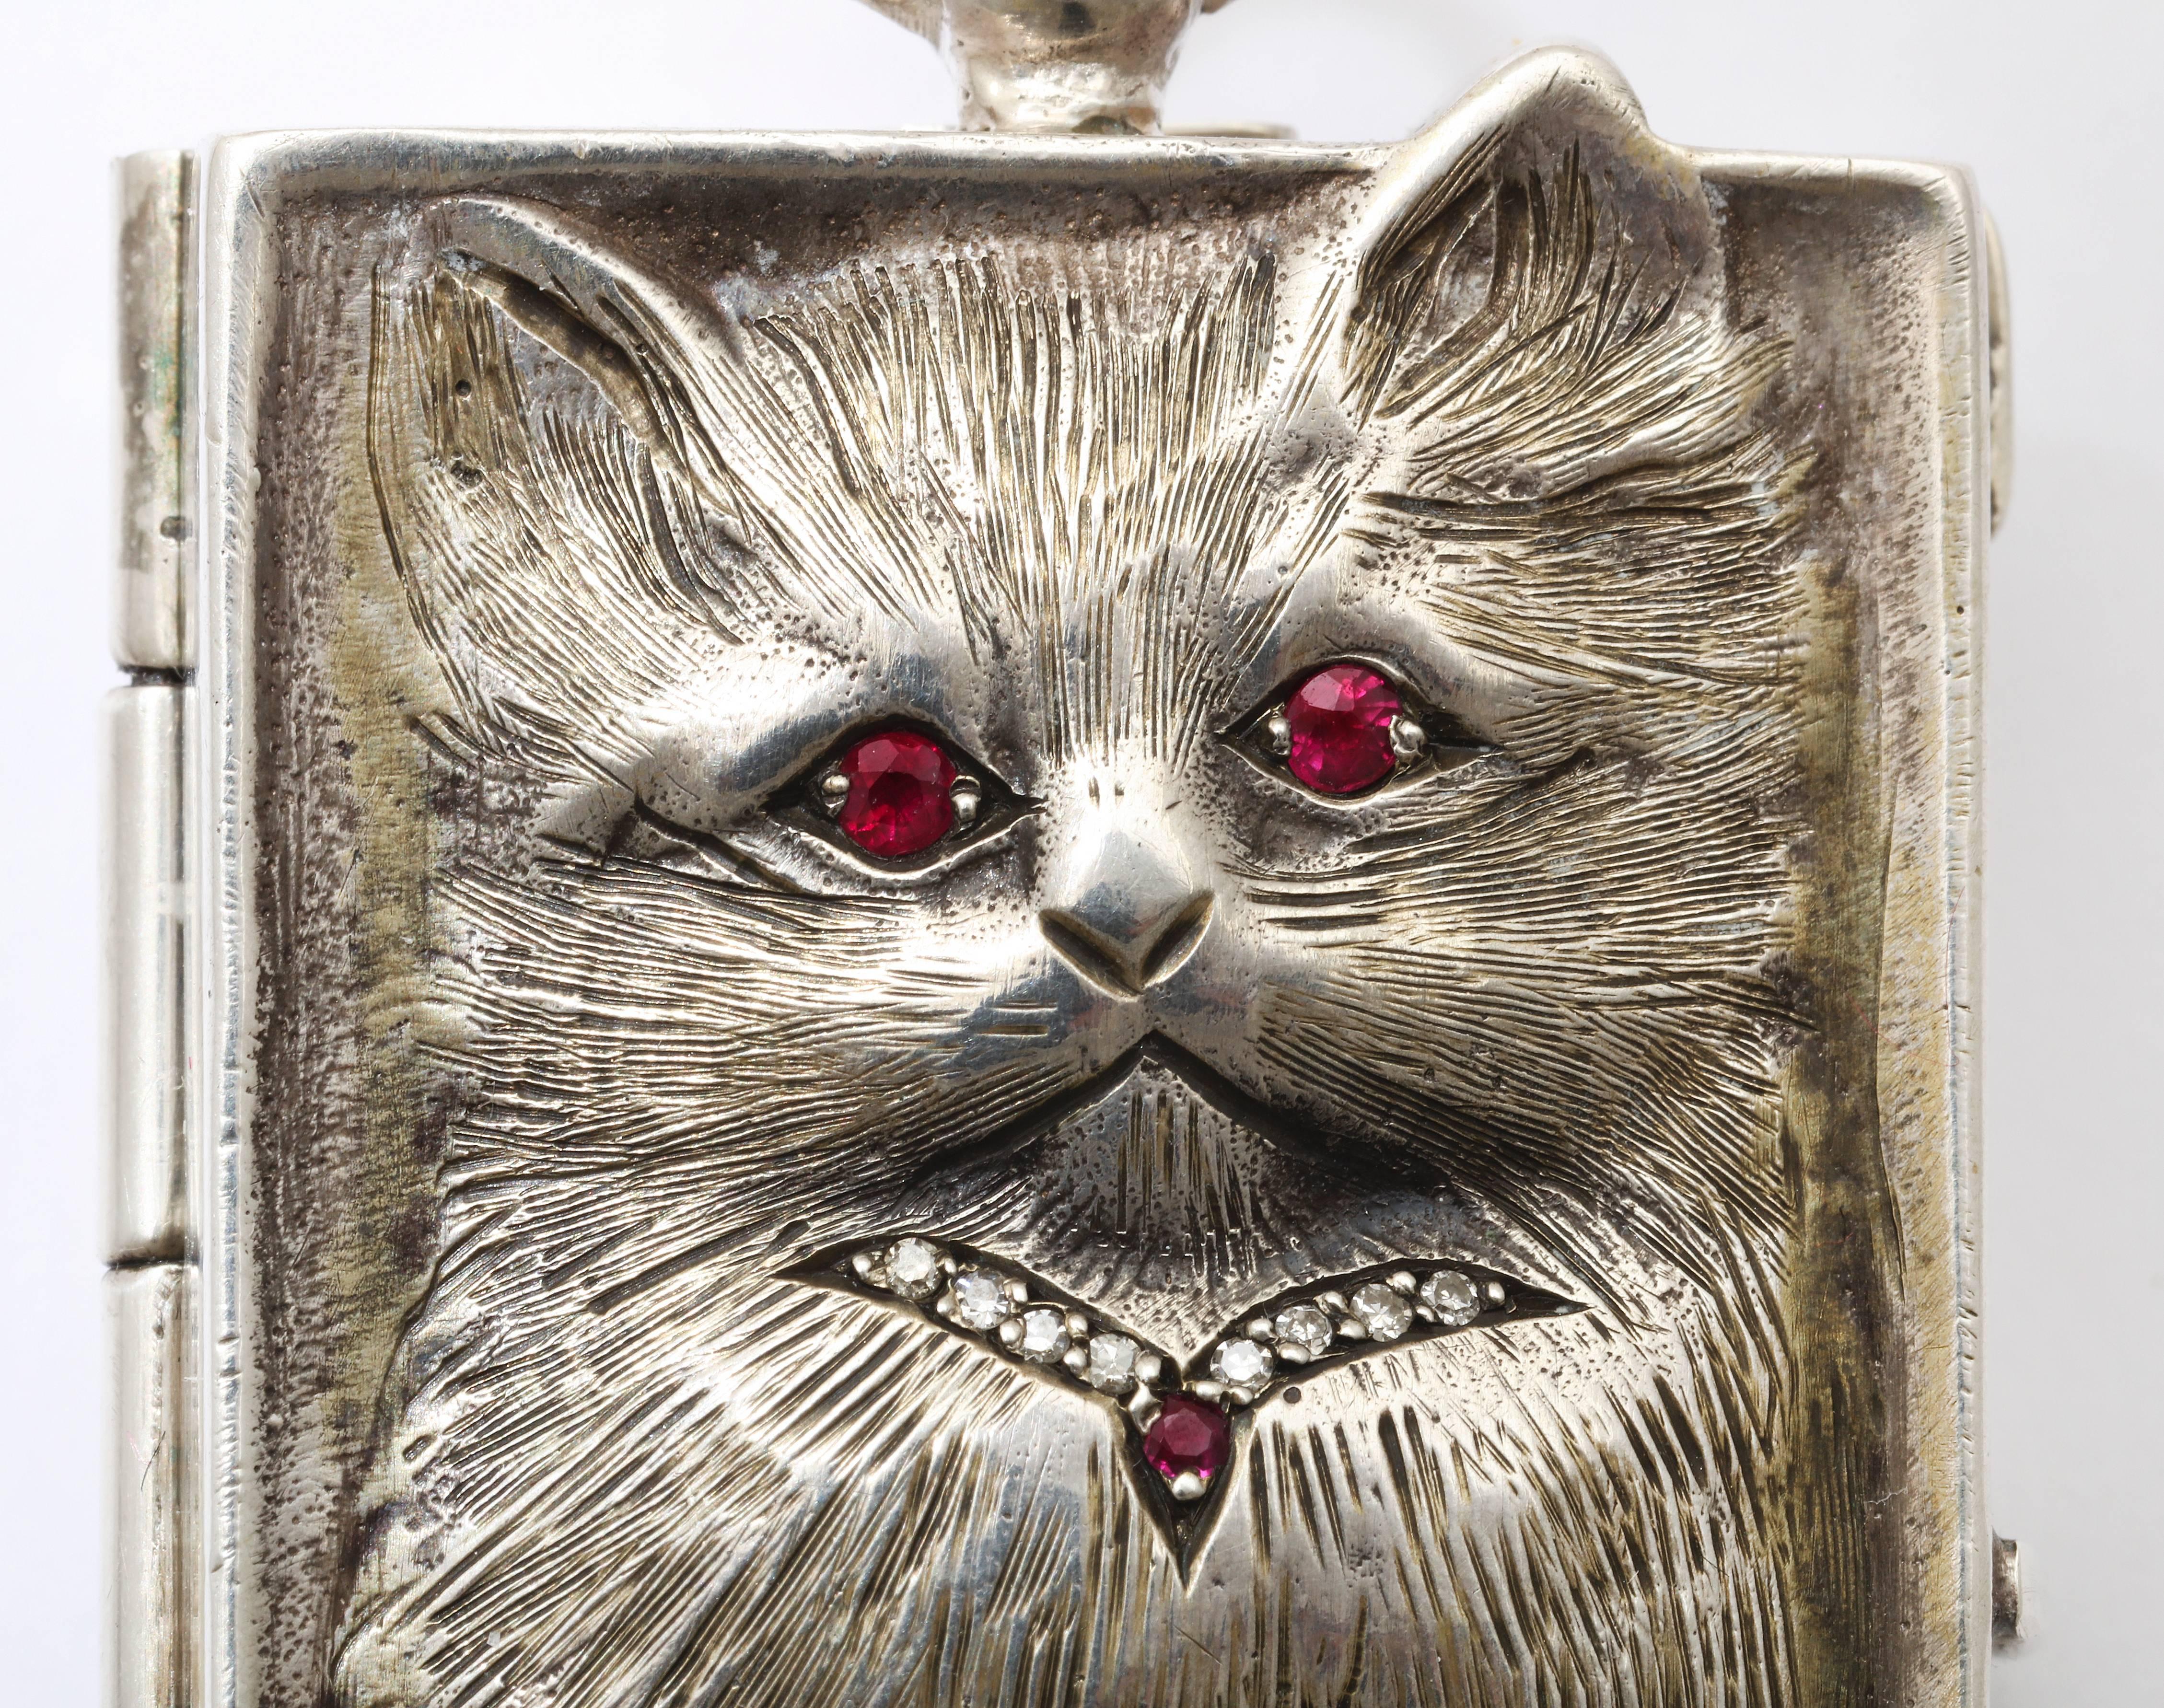  A two  inch cat pendant is sterling silver, has ruby eyes and a diamond collar, and is sweet enough to hug. Engraved on both sides en repousse, this feline is jumping from its confines. The giggle comes when you turn it over and see the diamond